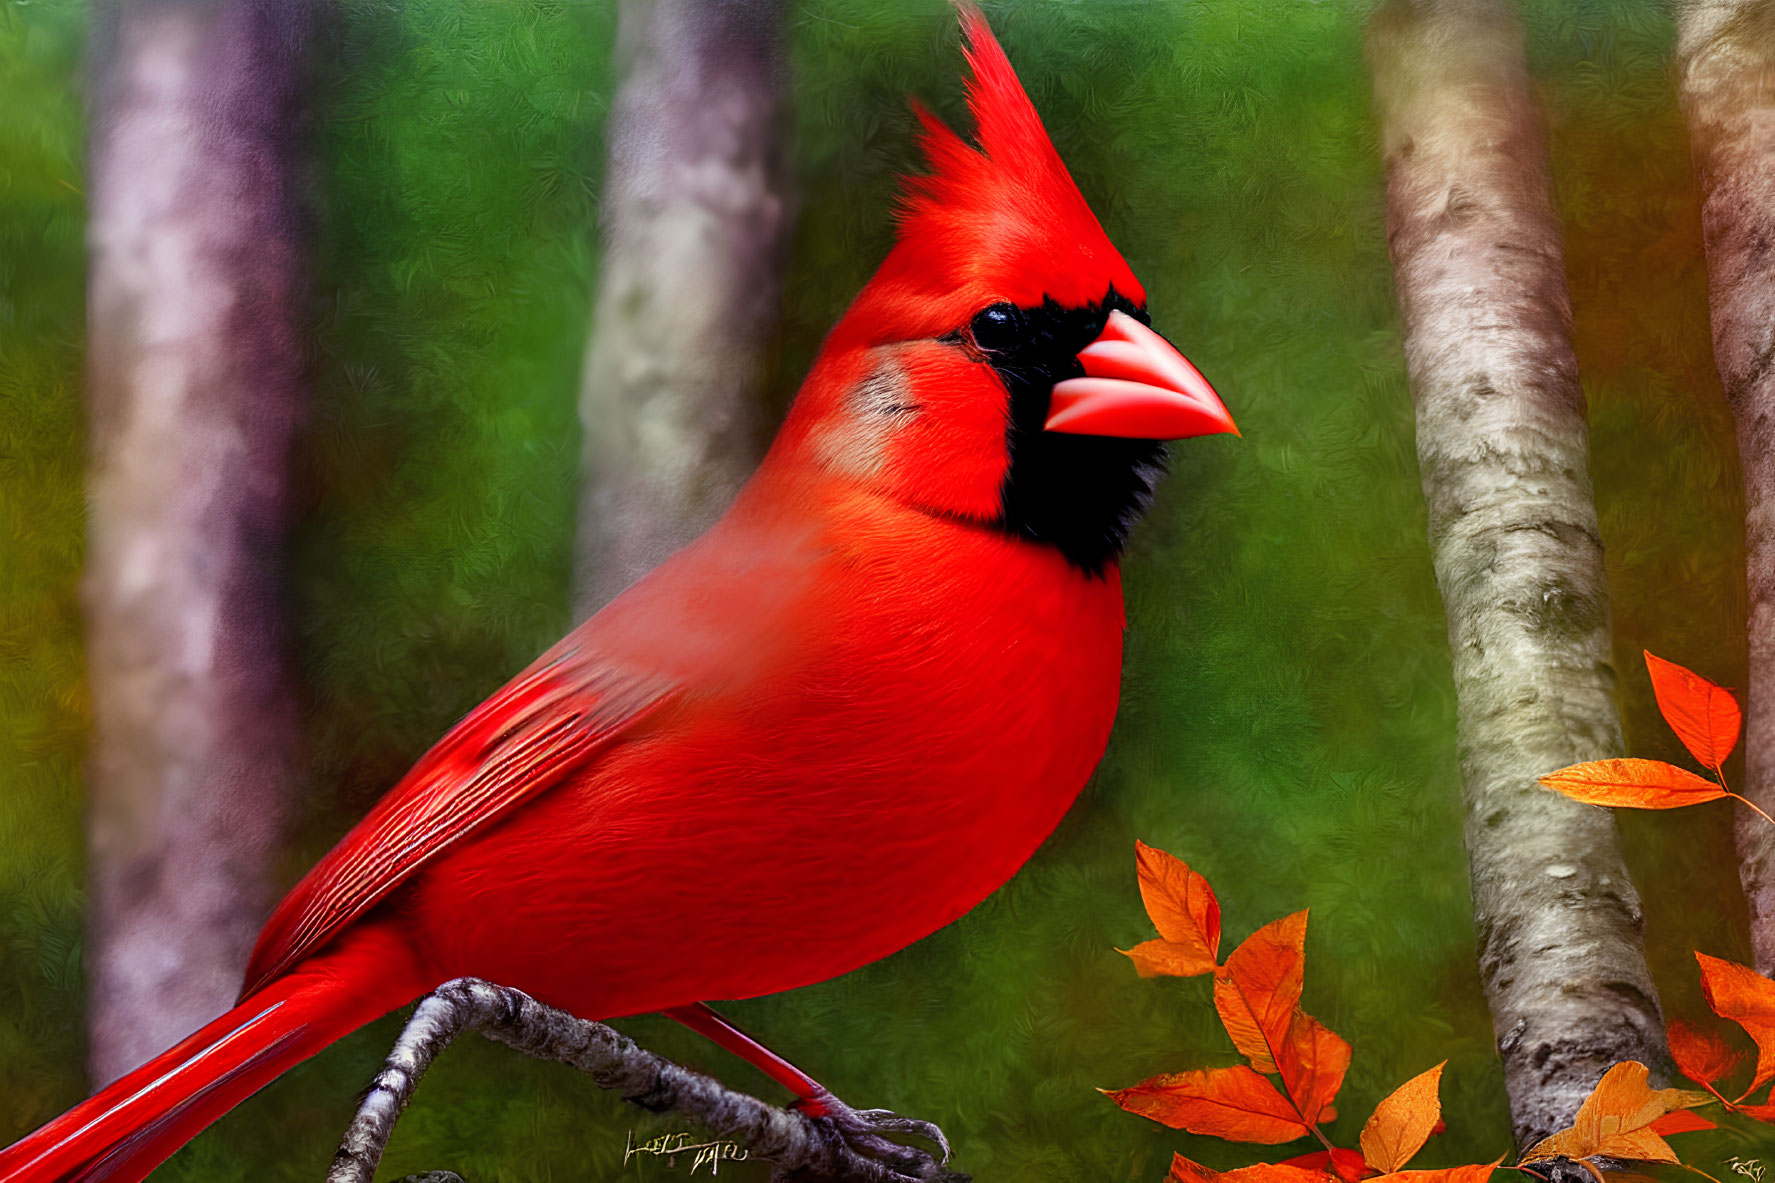 Red Cardinal Bird Perched on Branch with Greenery Background